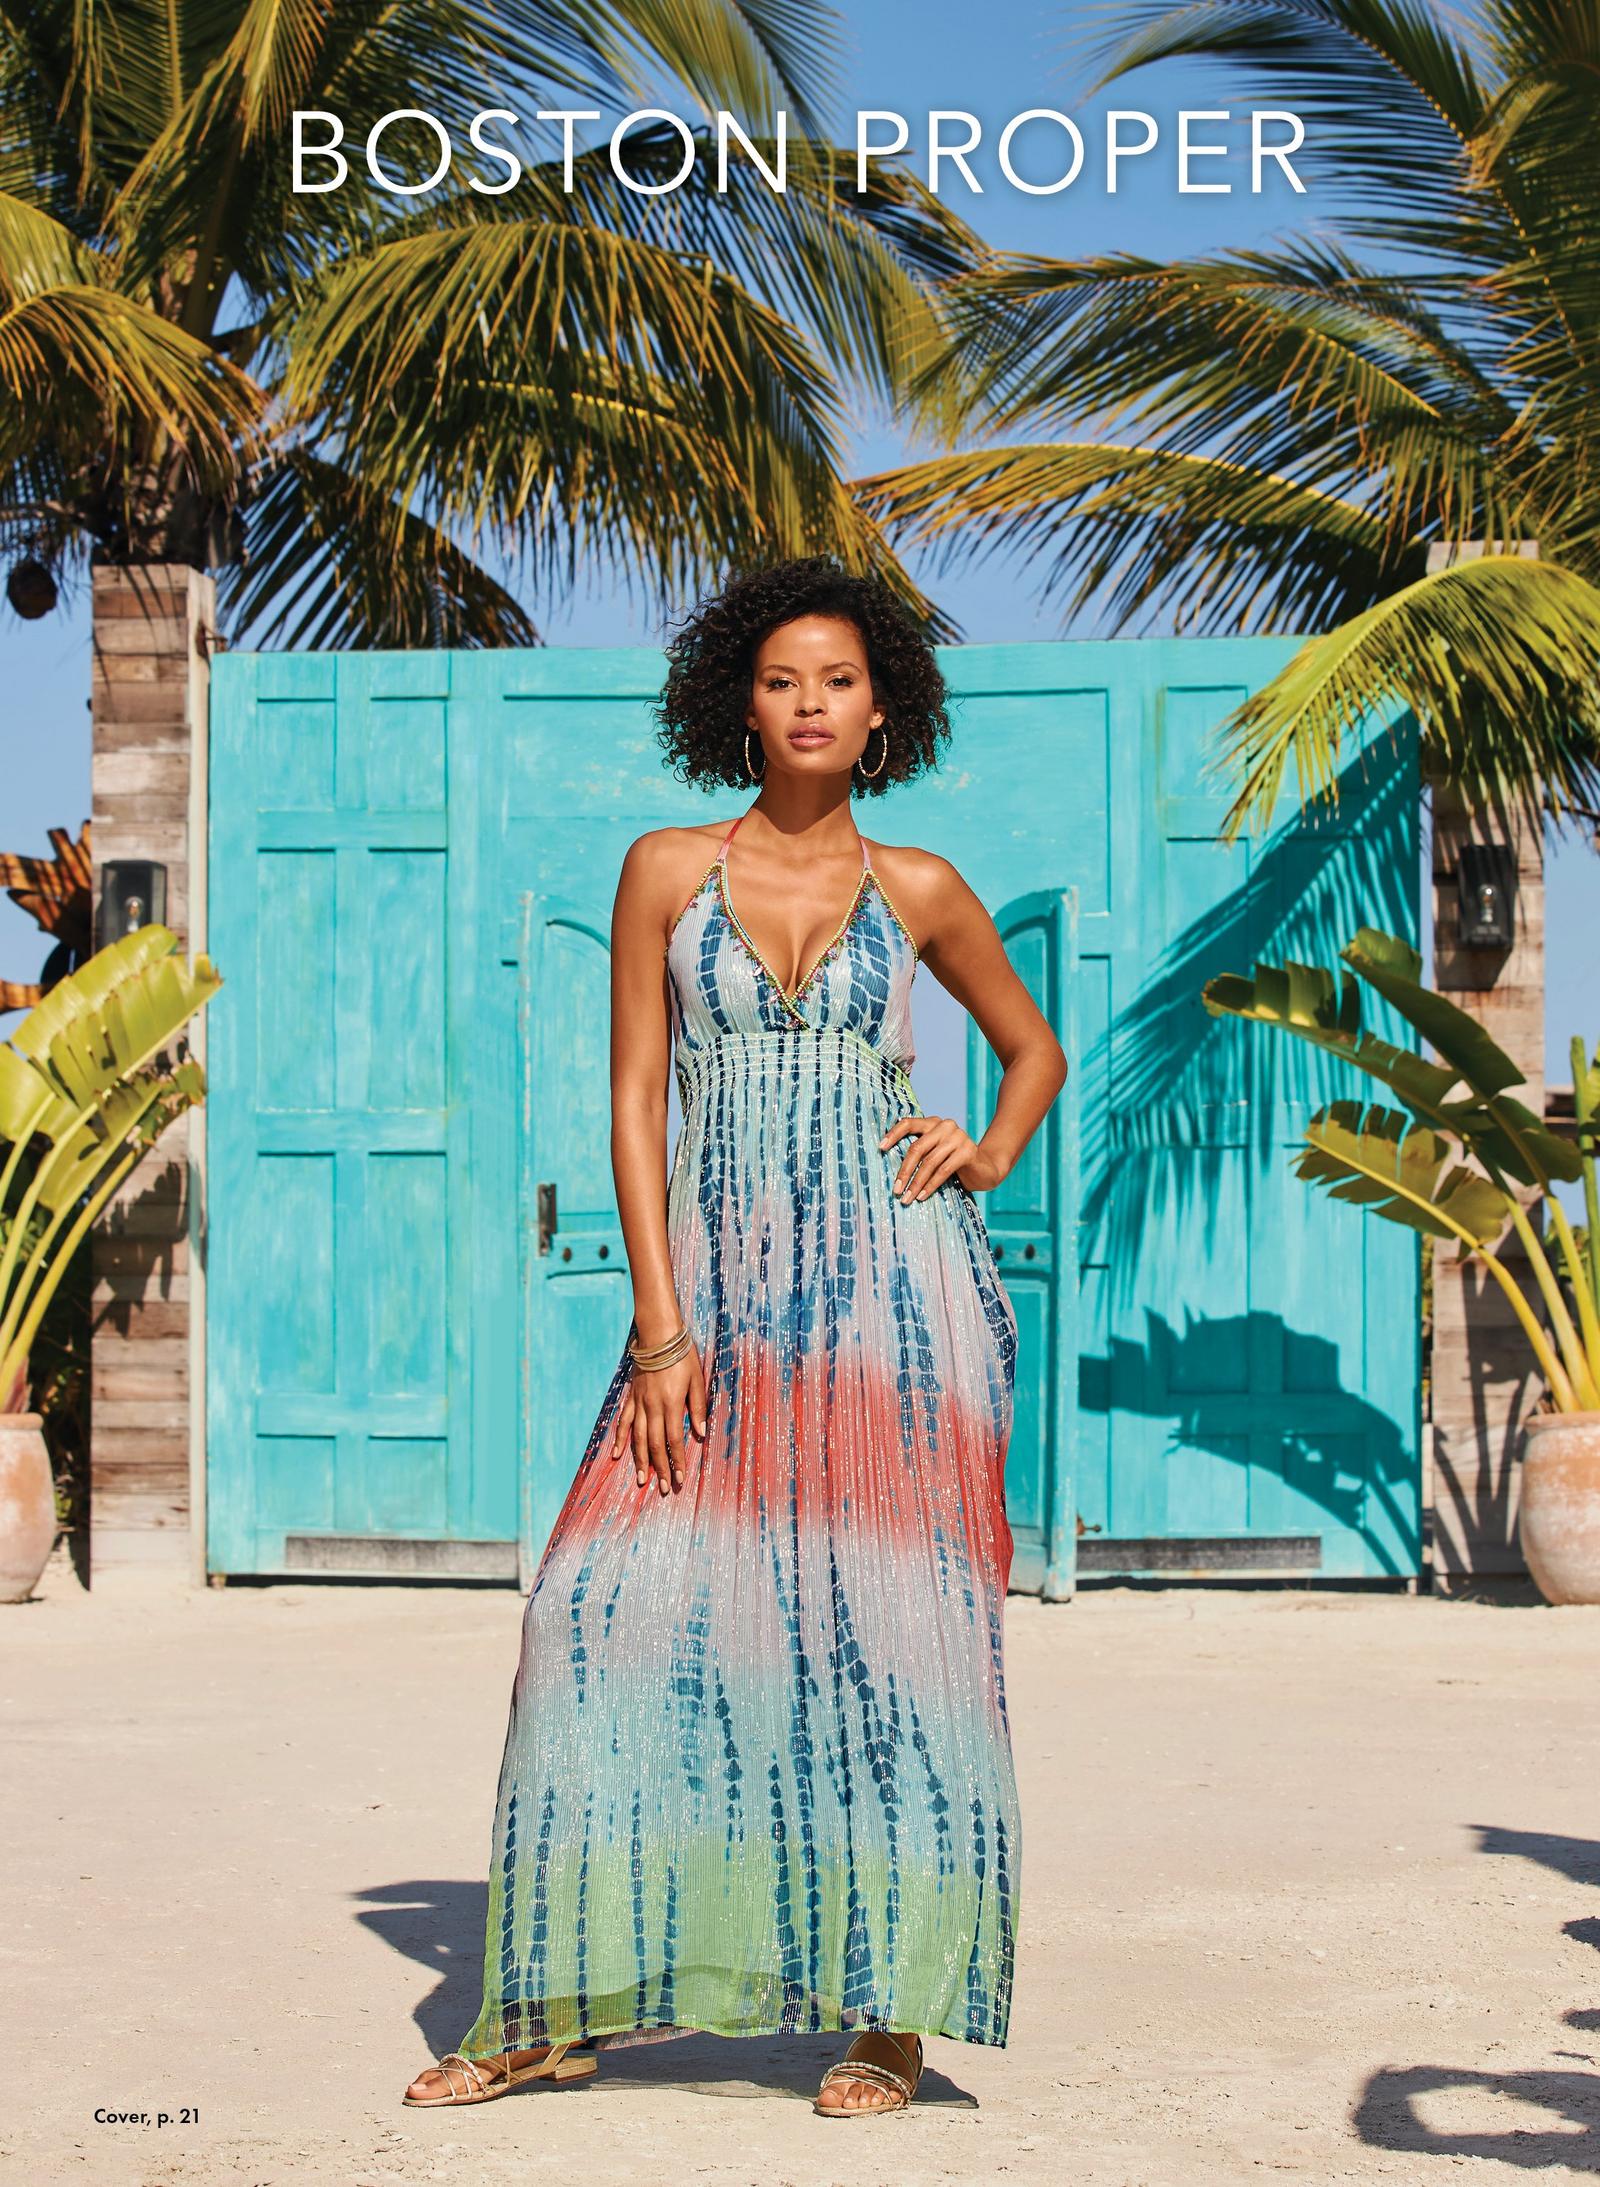 Model is wearing the Tie-Dye Print Embellished Maxi Dress in blues, white, coral and green with an embroidery trimmed bustline.